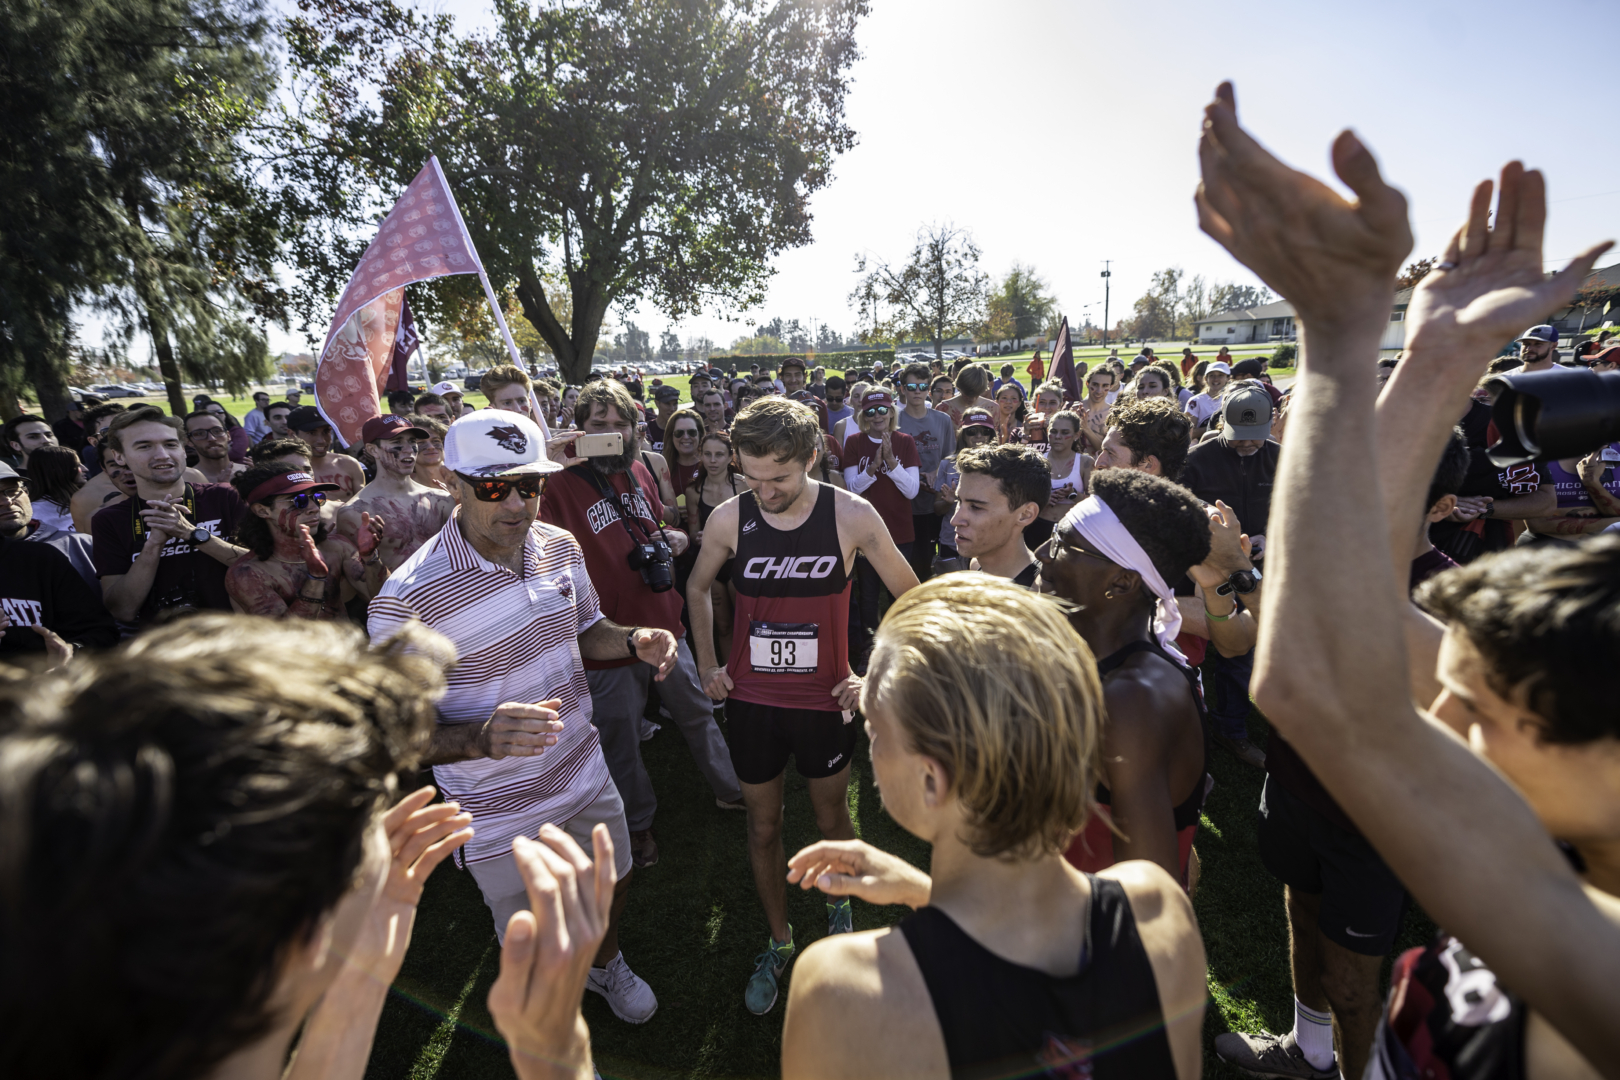 Rory Abberton (middle, wearing bib #93) listens to Head Coach Gary Towne celebratory speech as a number of teammates and fans gather around following the 2019 NCAA Championship race.